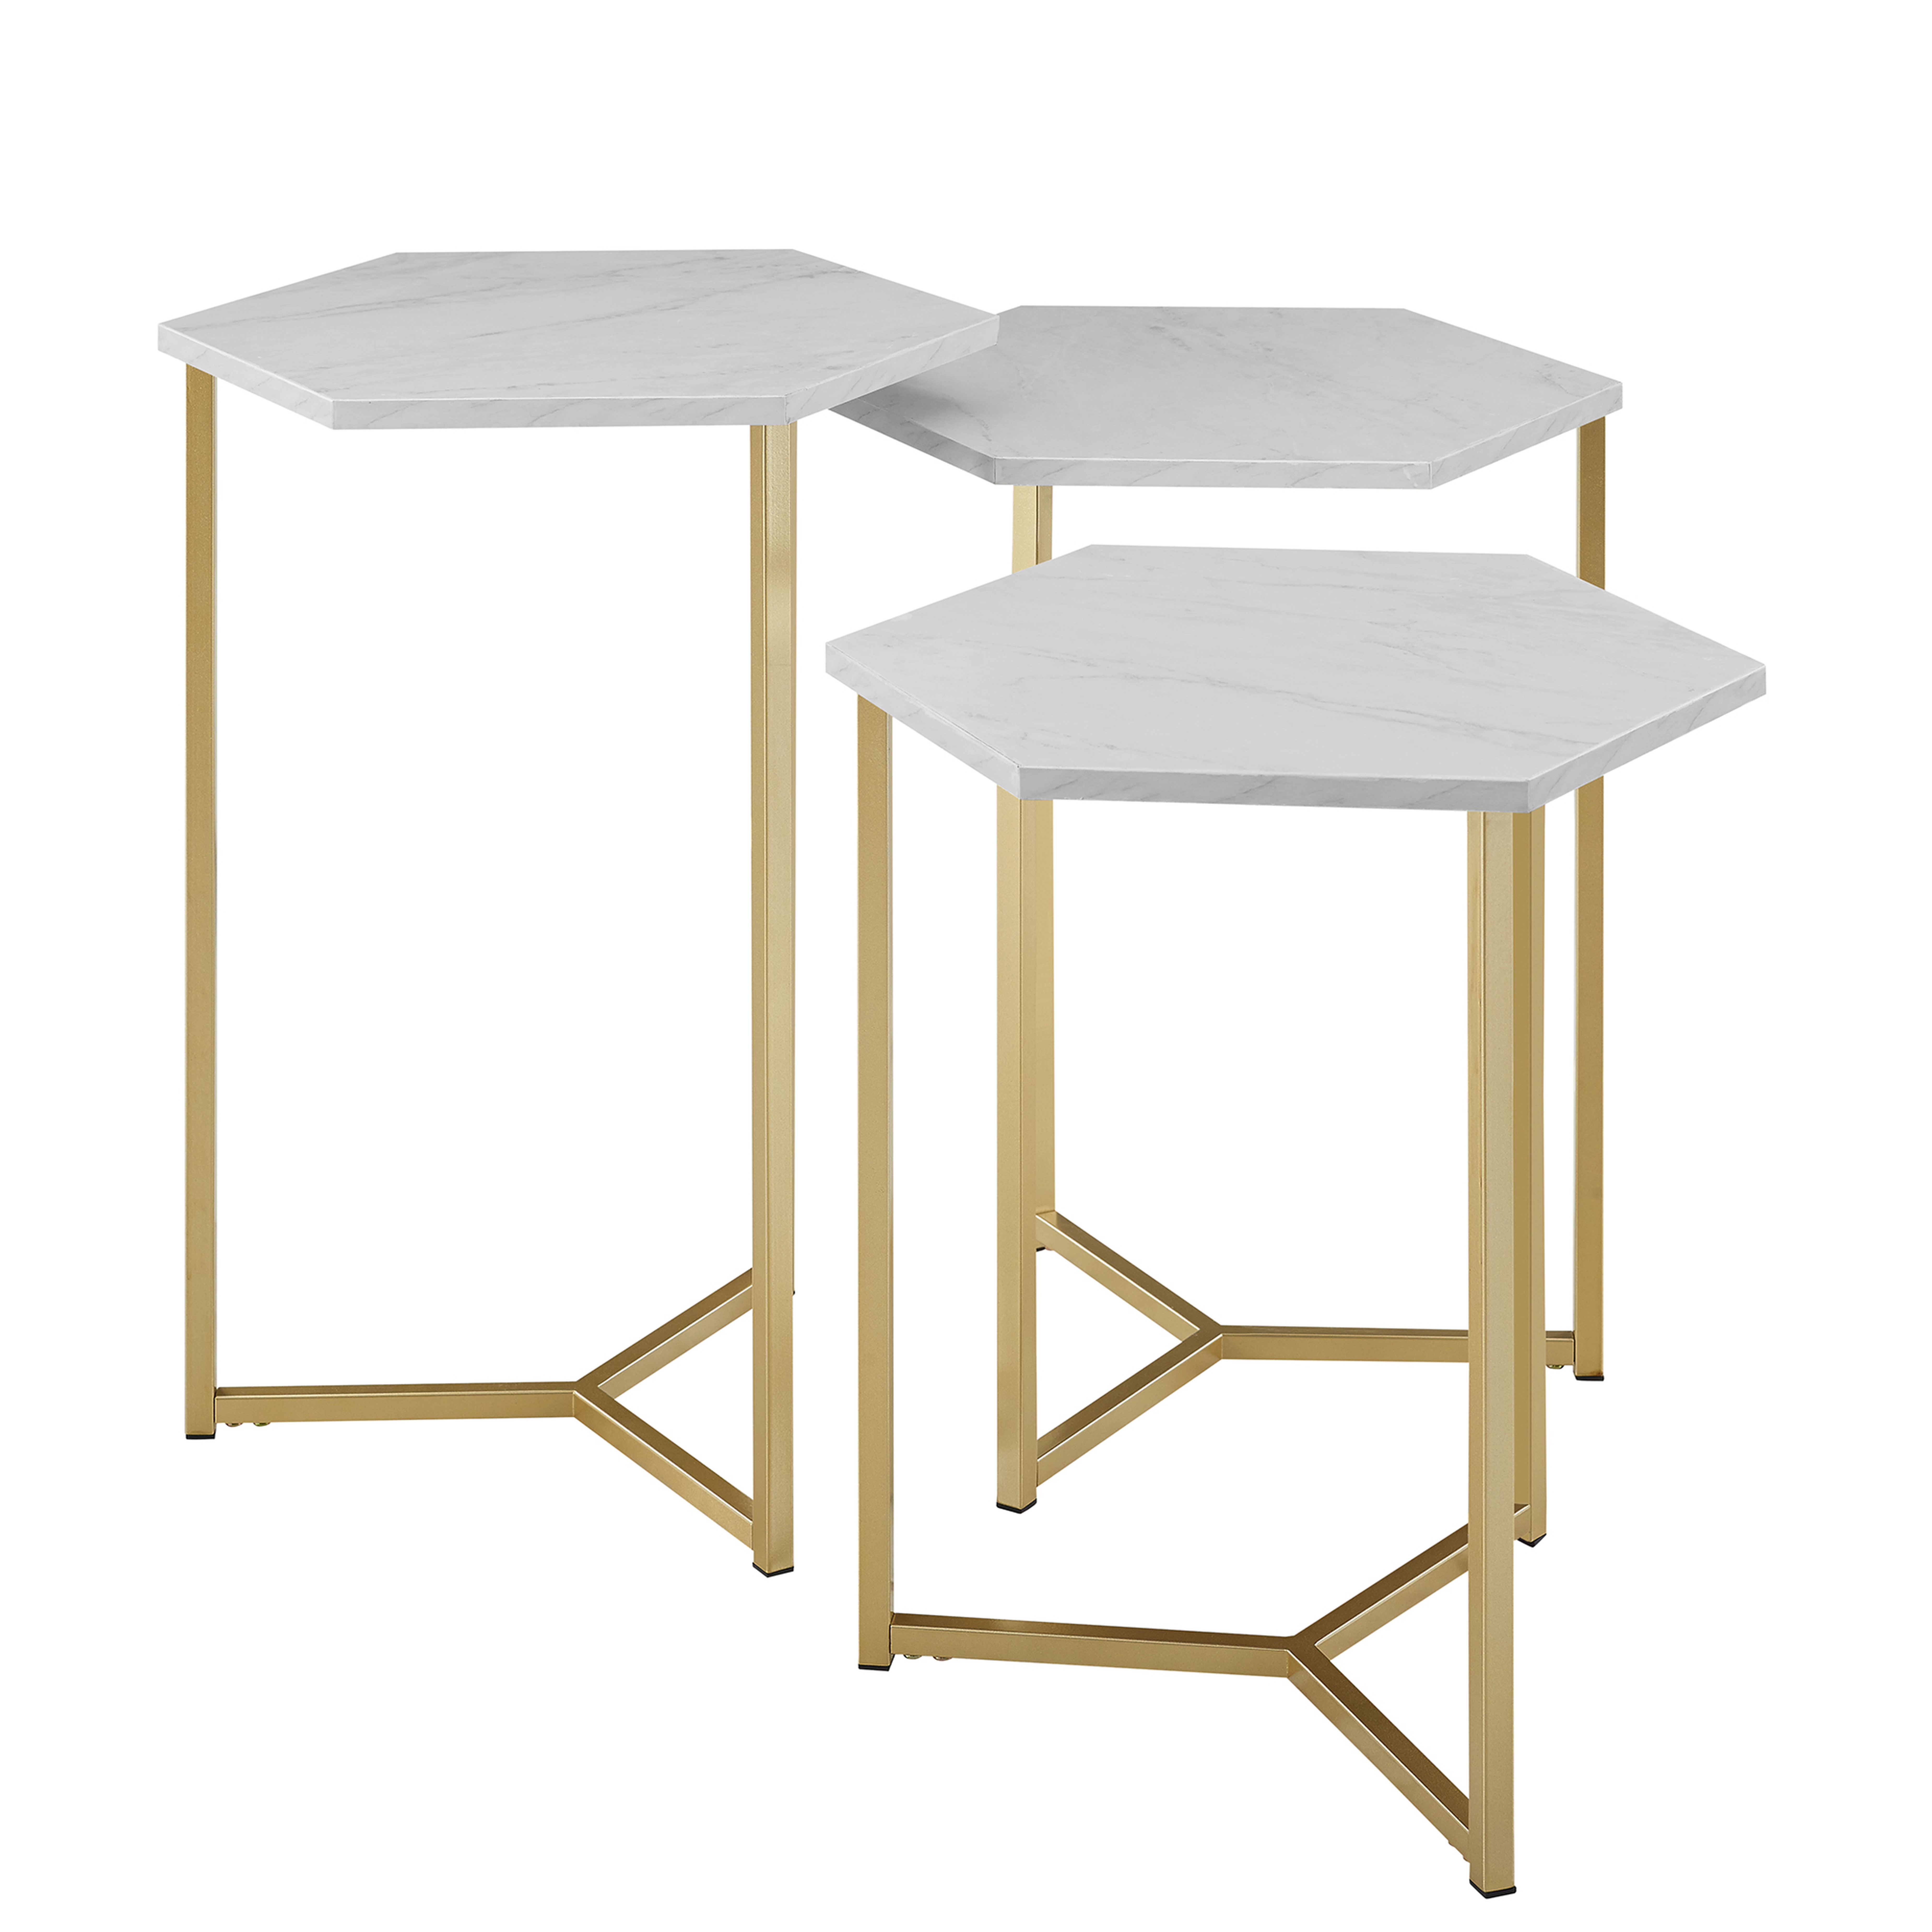 Hexagon Modern Wood Nesting Tables, Set of 3 - Faux White Marble/Gold  - Contour & Co.